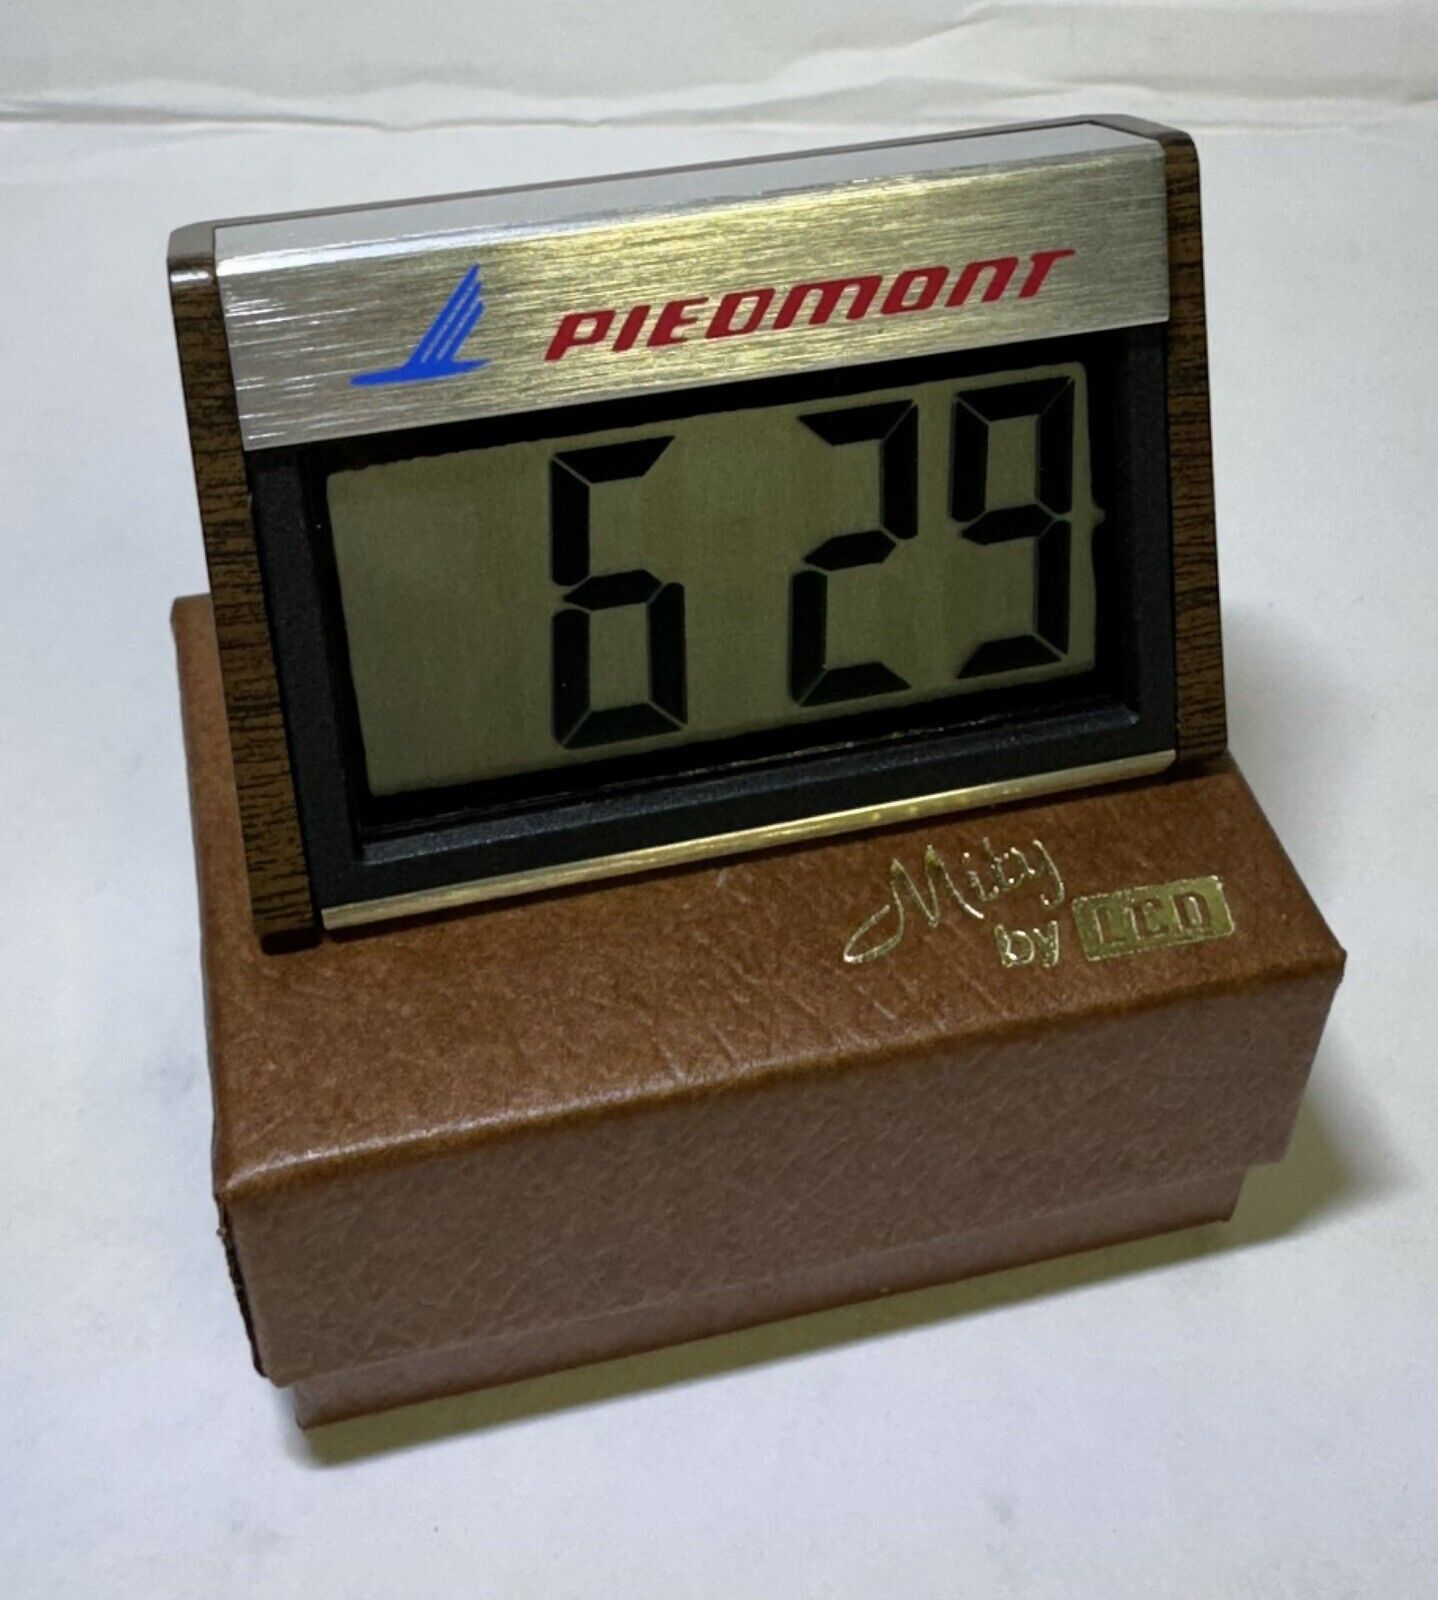 Piedmont Airlines 1980s NOS “Mity LCD” Travel Clock - MINT